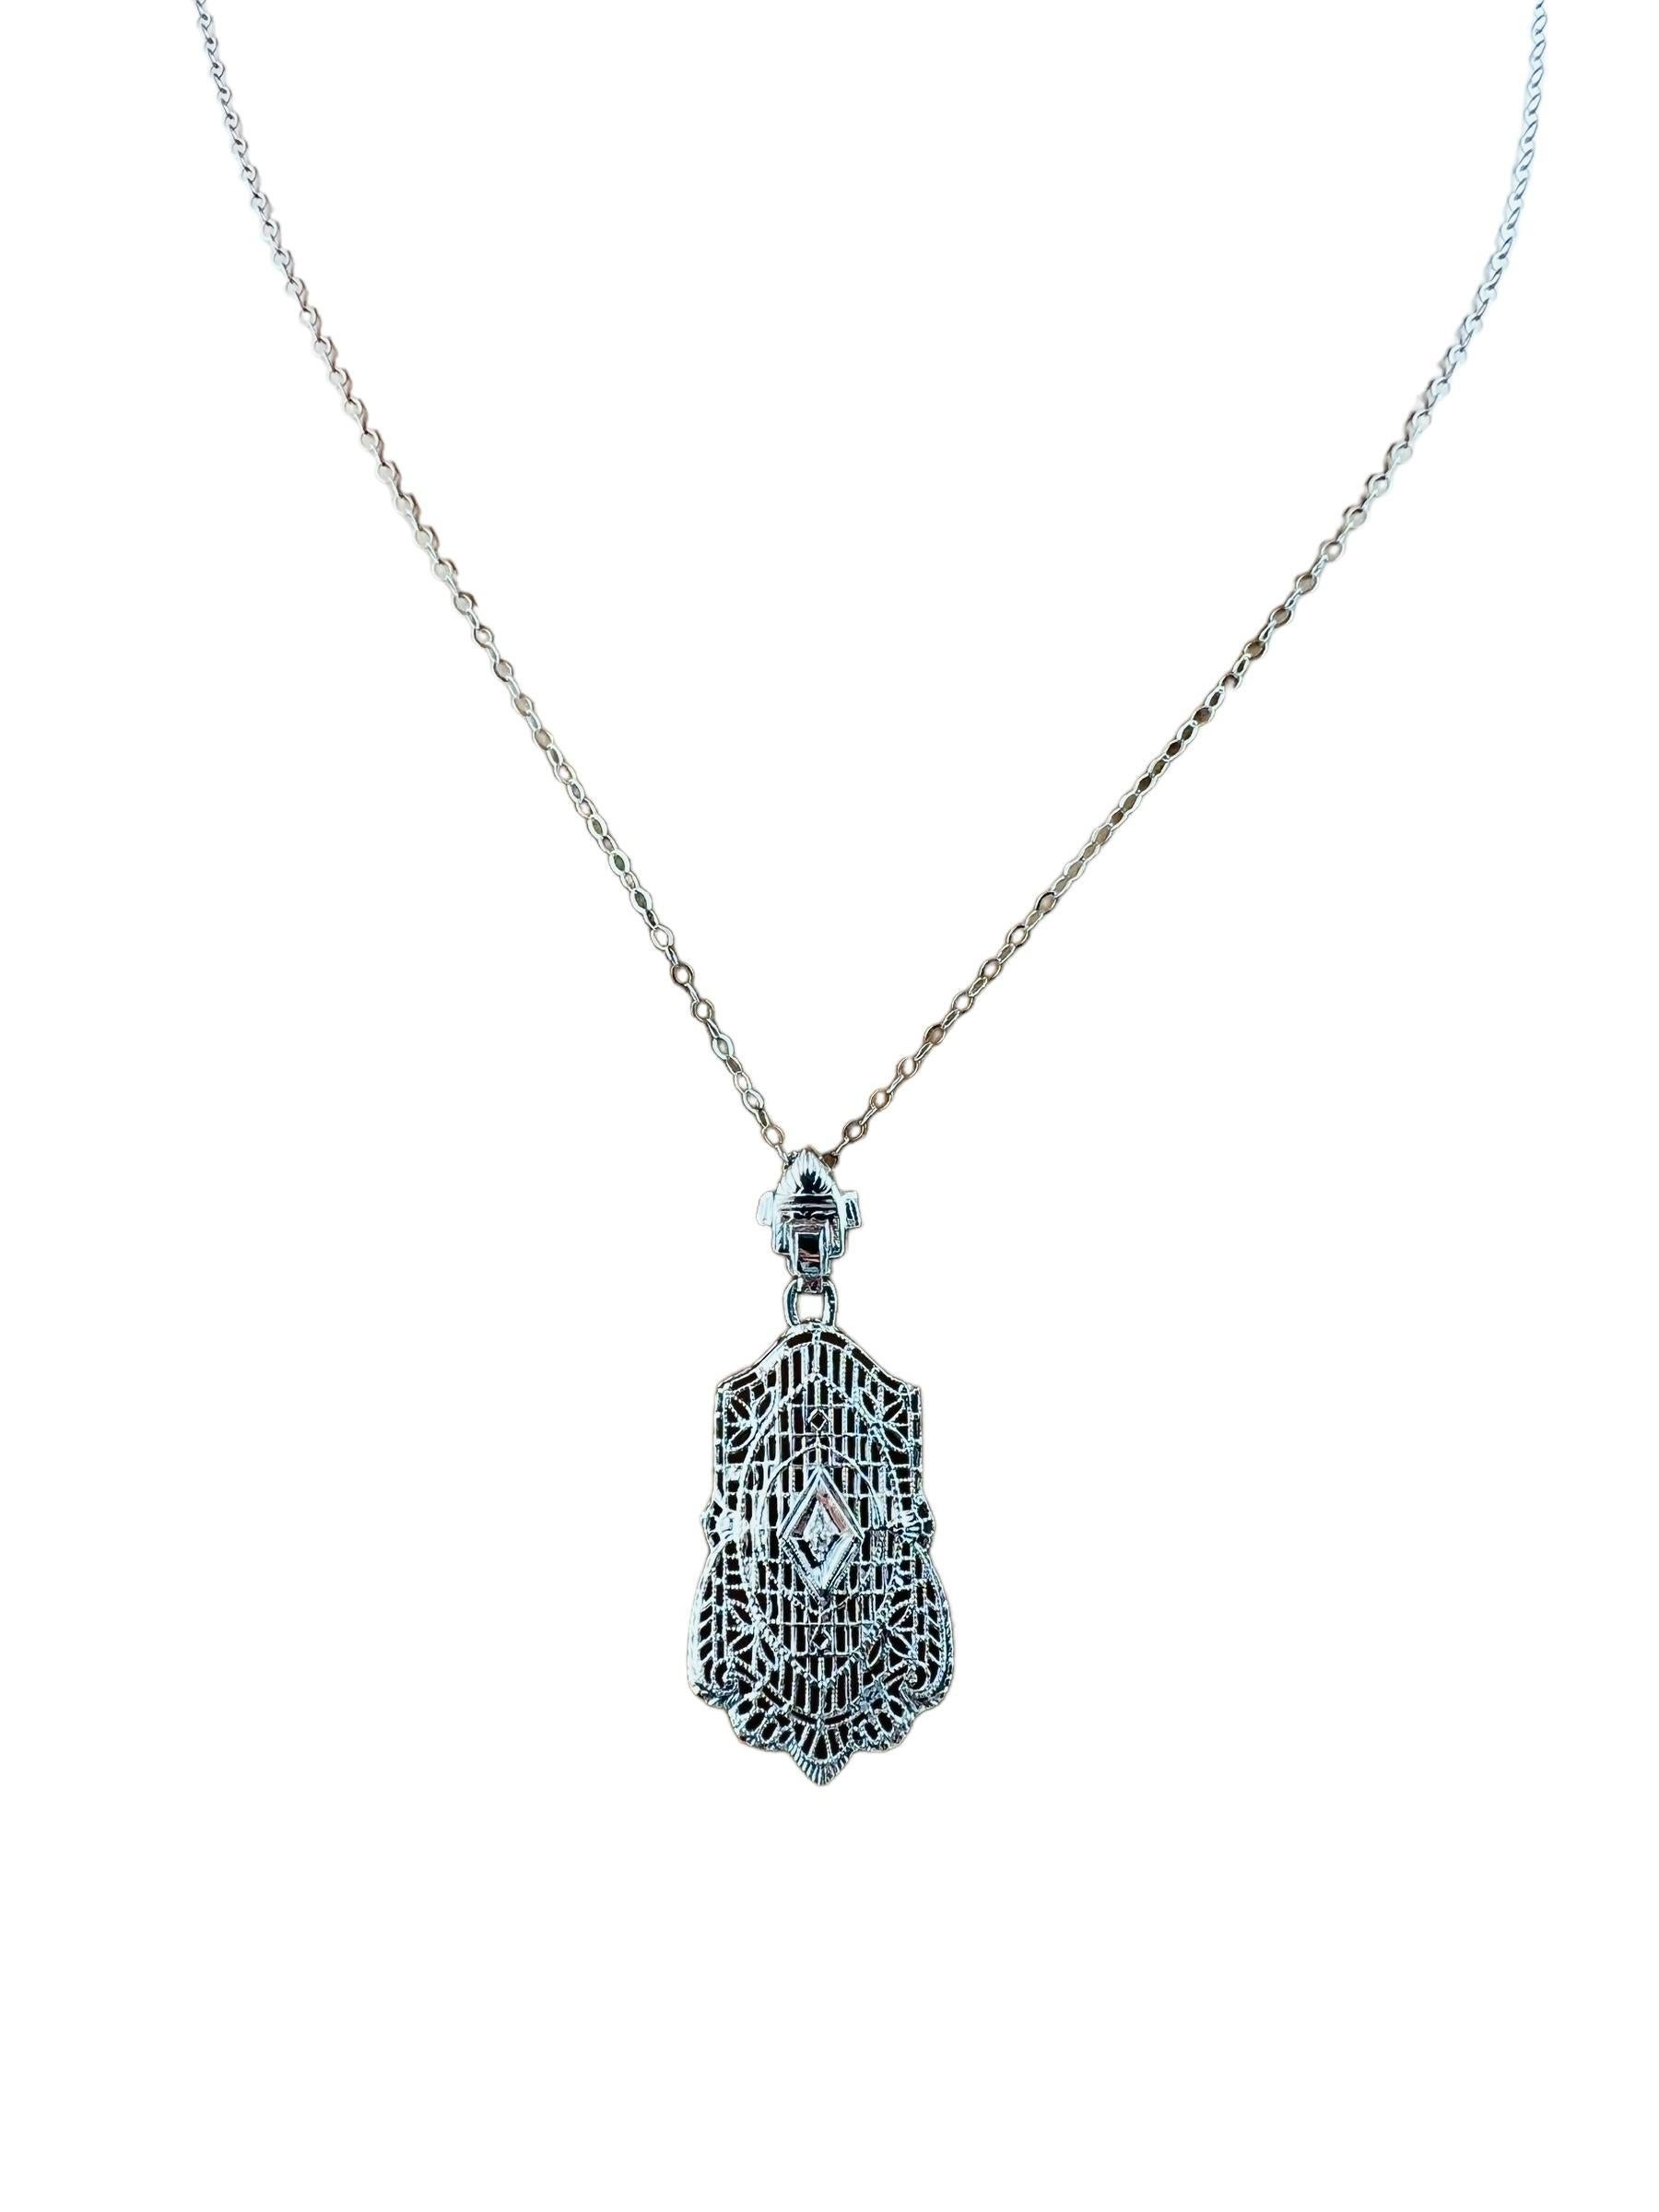 14K White Gold Diamond Filigree Pendant Necklace

This beautiful white gold necklace features a filigree style pendant accented with a center diamond.

Single cut diamond is approx. 0.01 cts

Diamond clarity - I1

Diamond color - J

Chain is approx.